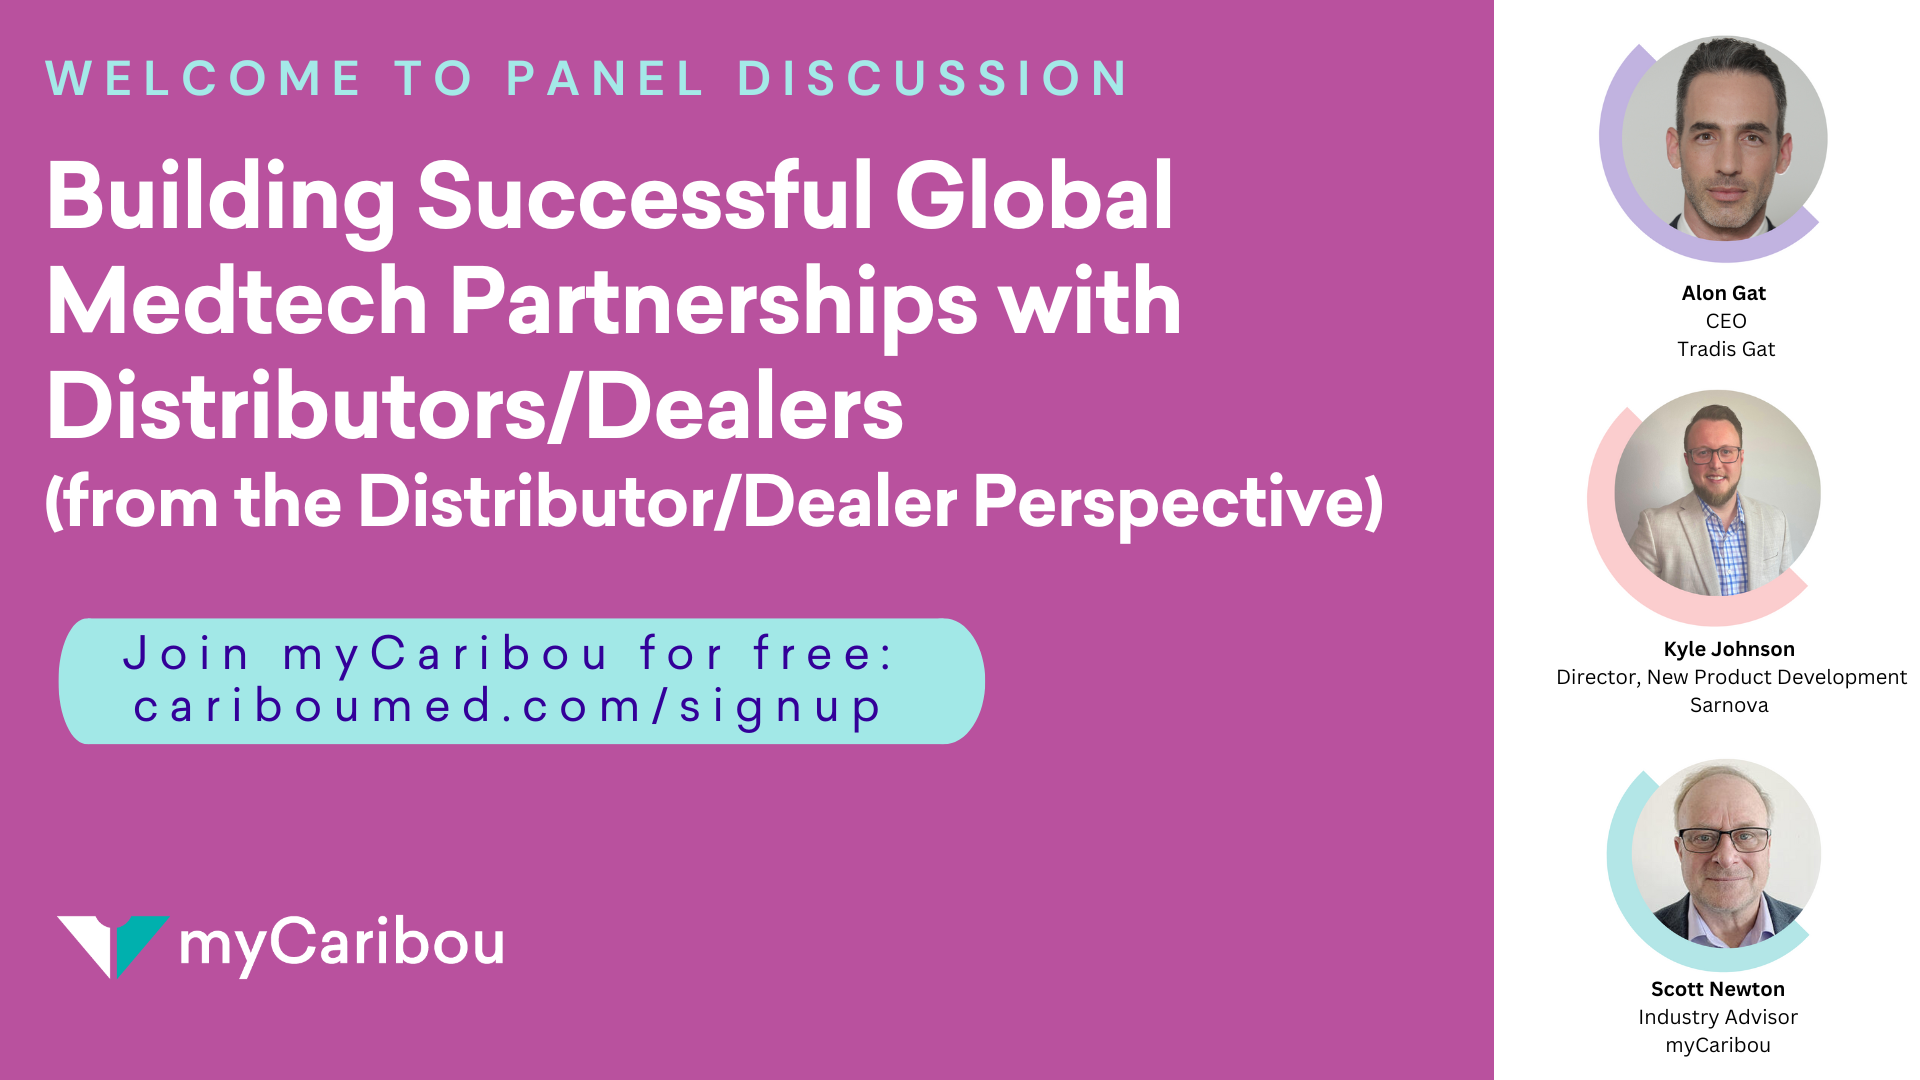 Building Successful Global Medtech Partnerships with Distributors/Dealers (from the Distributor/Dealer Perspective)